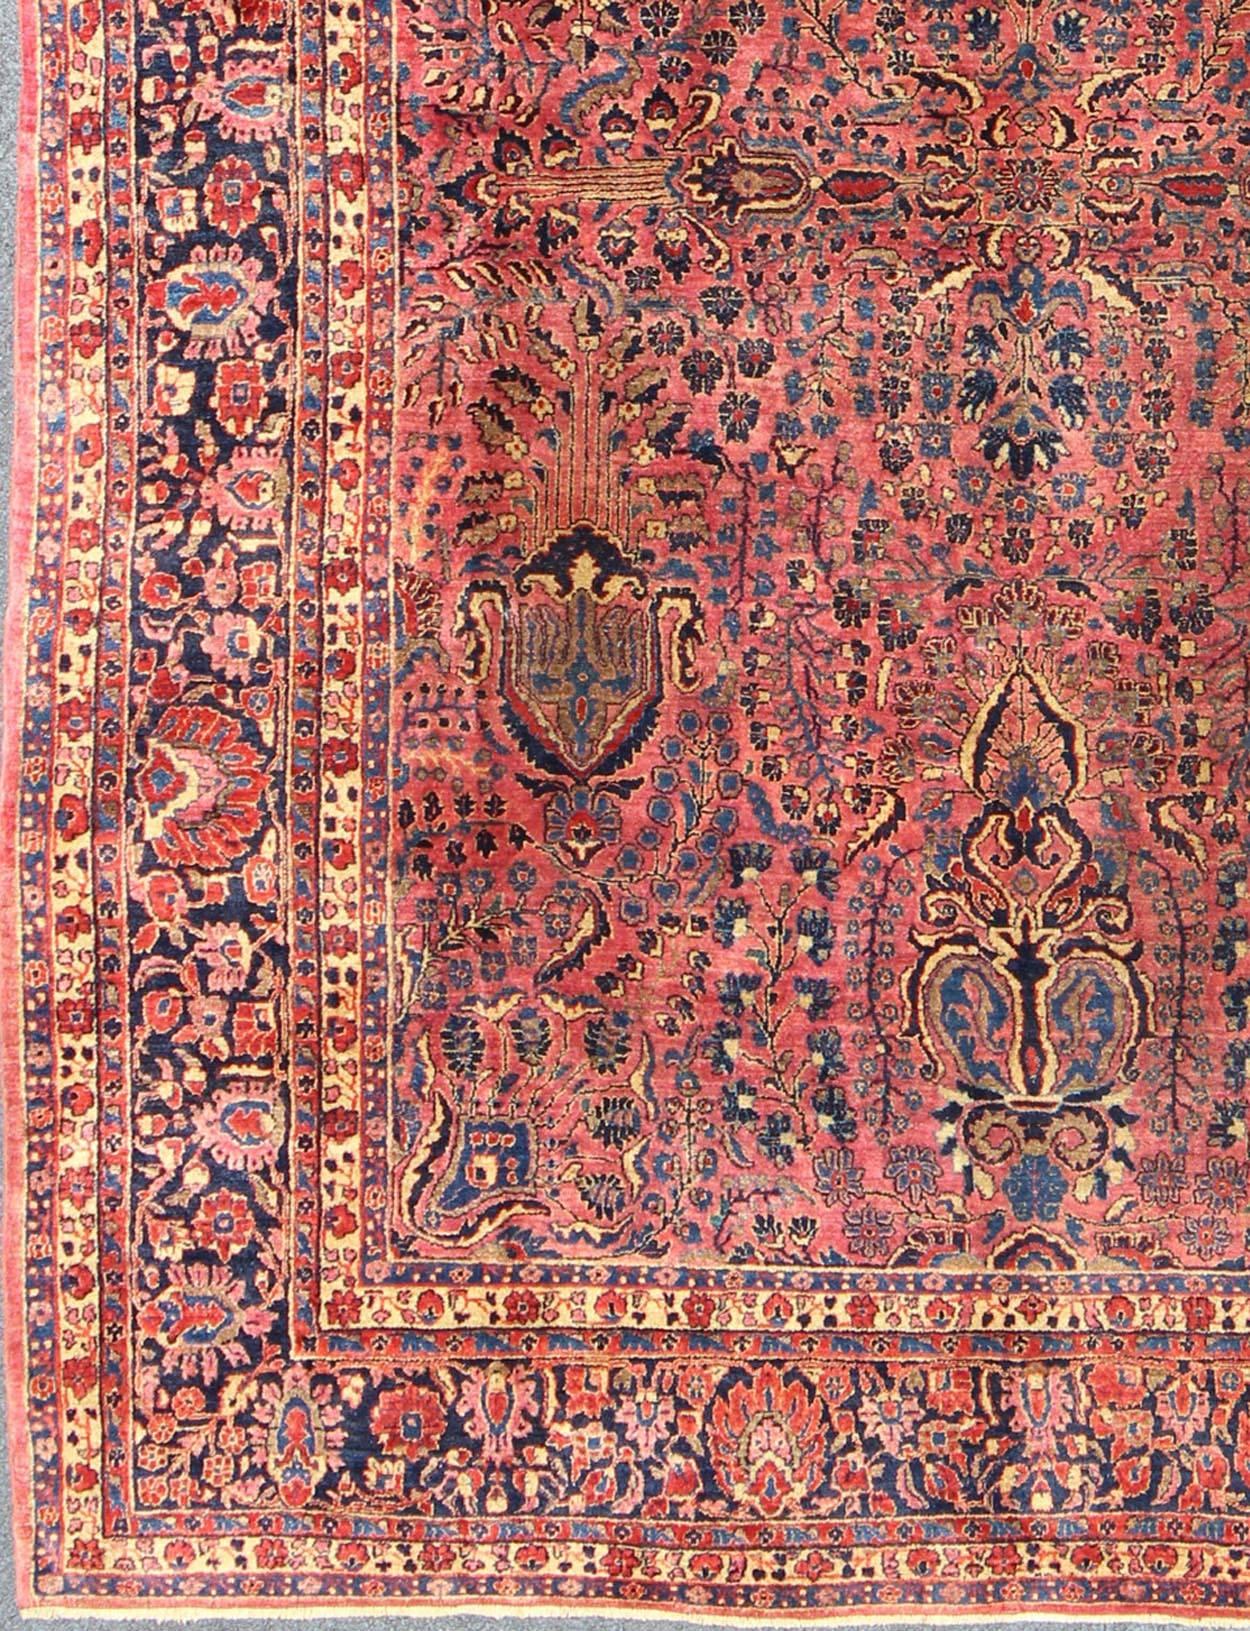 Antique Persian Sarouk Carpet with Deep Cranberry Field and Floral Elements, S12--0608, 1920's Antique Sarouk Rug.This wonderful, early 20th century Persian Sarouk rug features a masterfully woven deep cranberry field of large trees and a myriad of